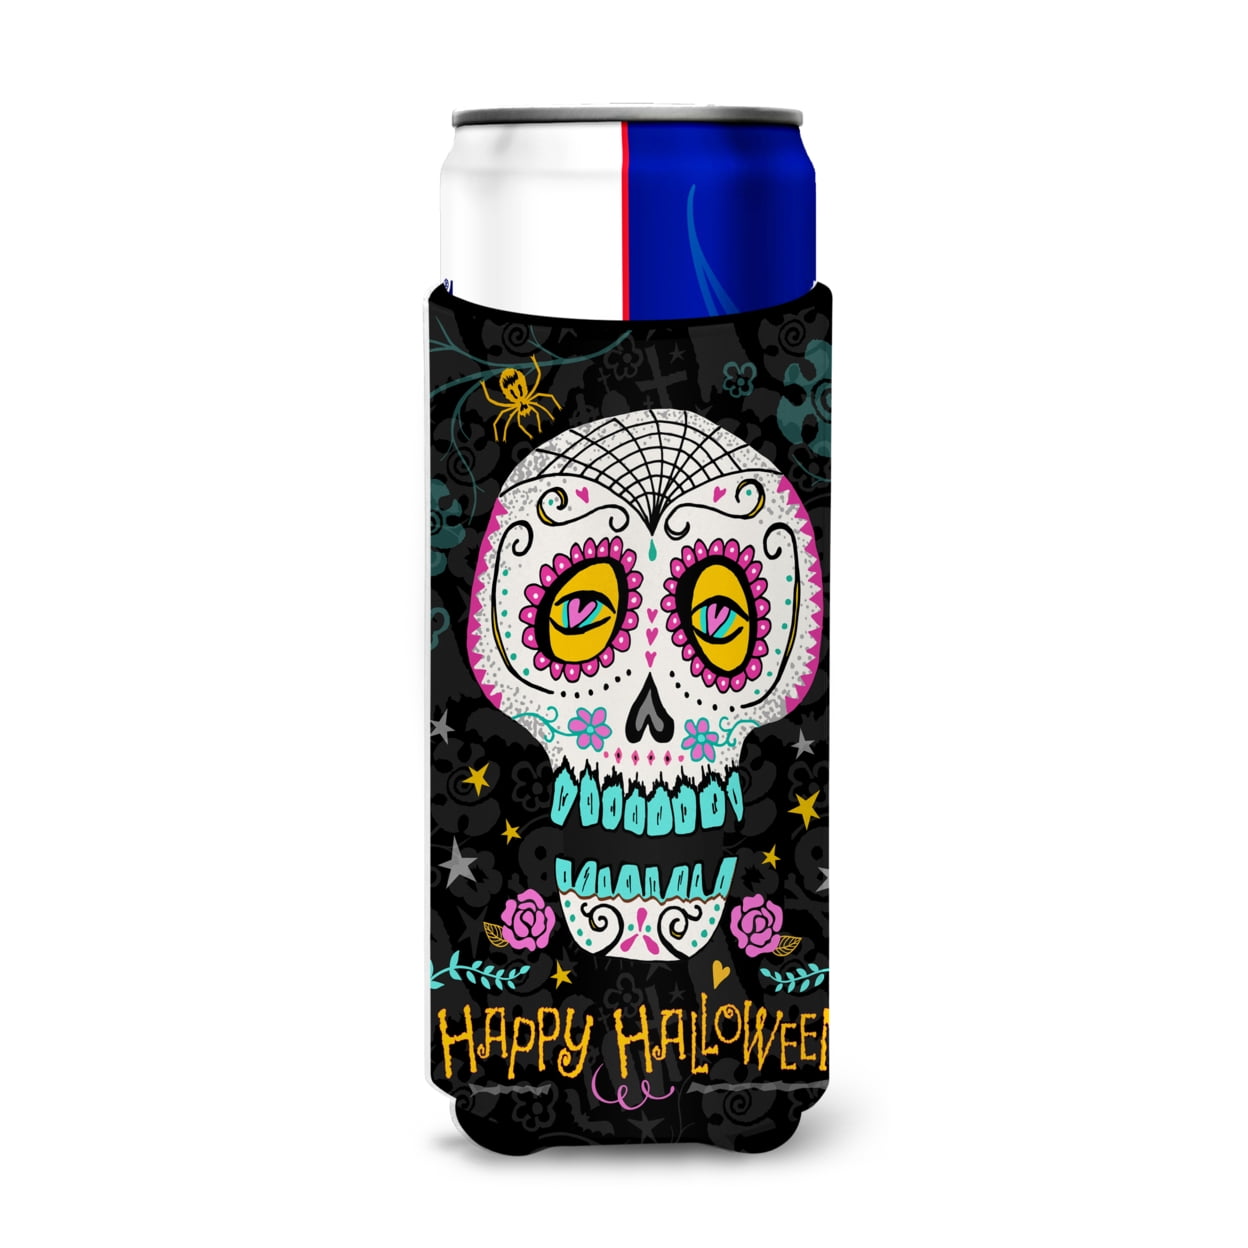 12oz Skinny Can Cooler Sugar Skull Stainless Steel Insulated